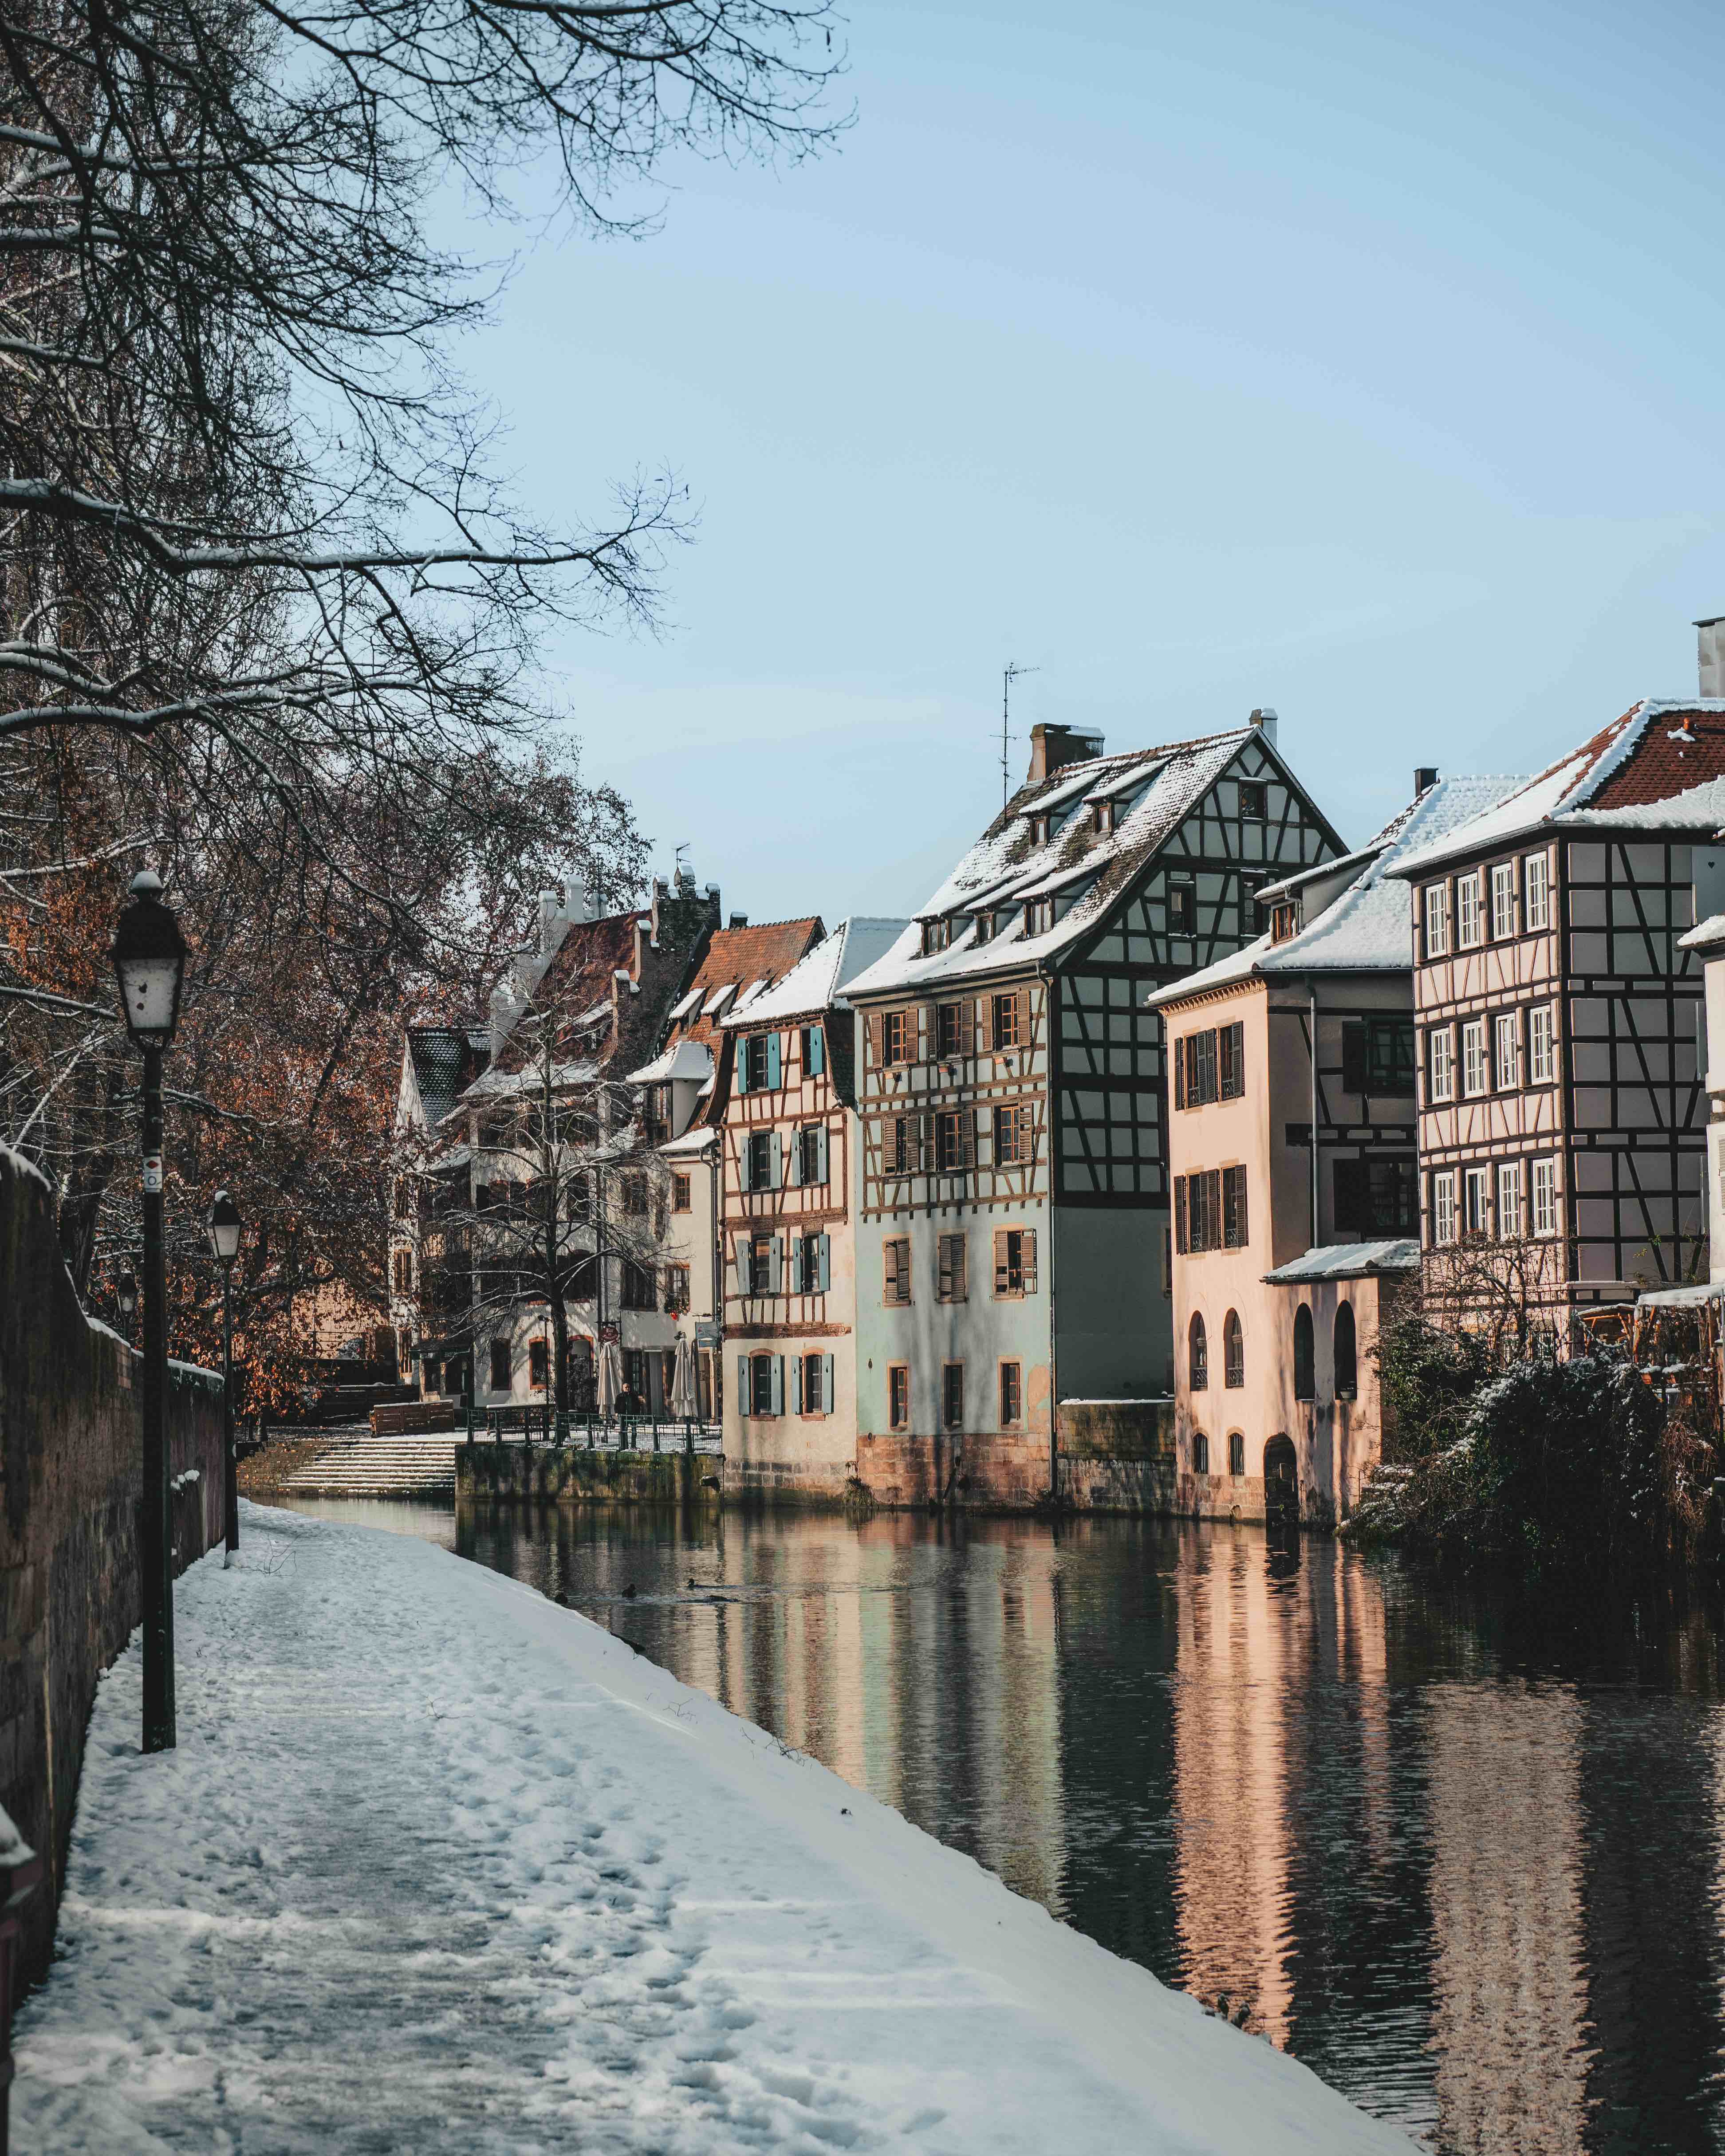 Strasbourg around Christmas time truly is special // Photo credit @travelwithadrie